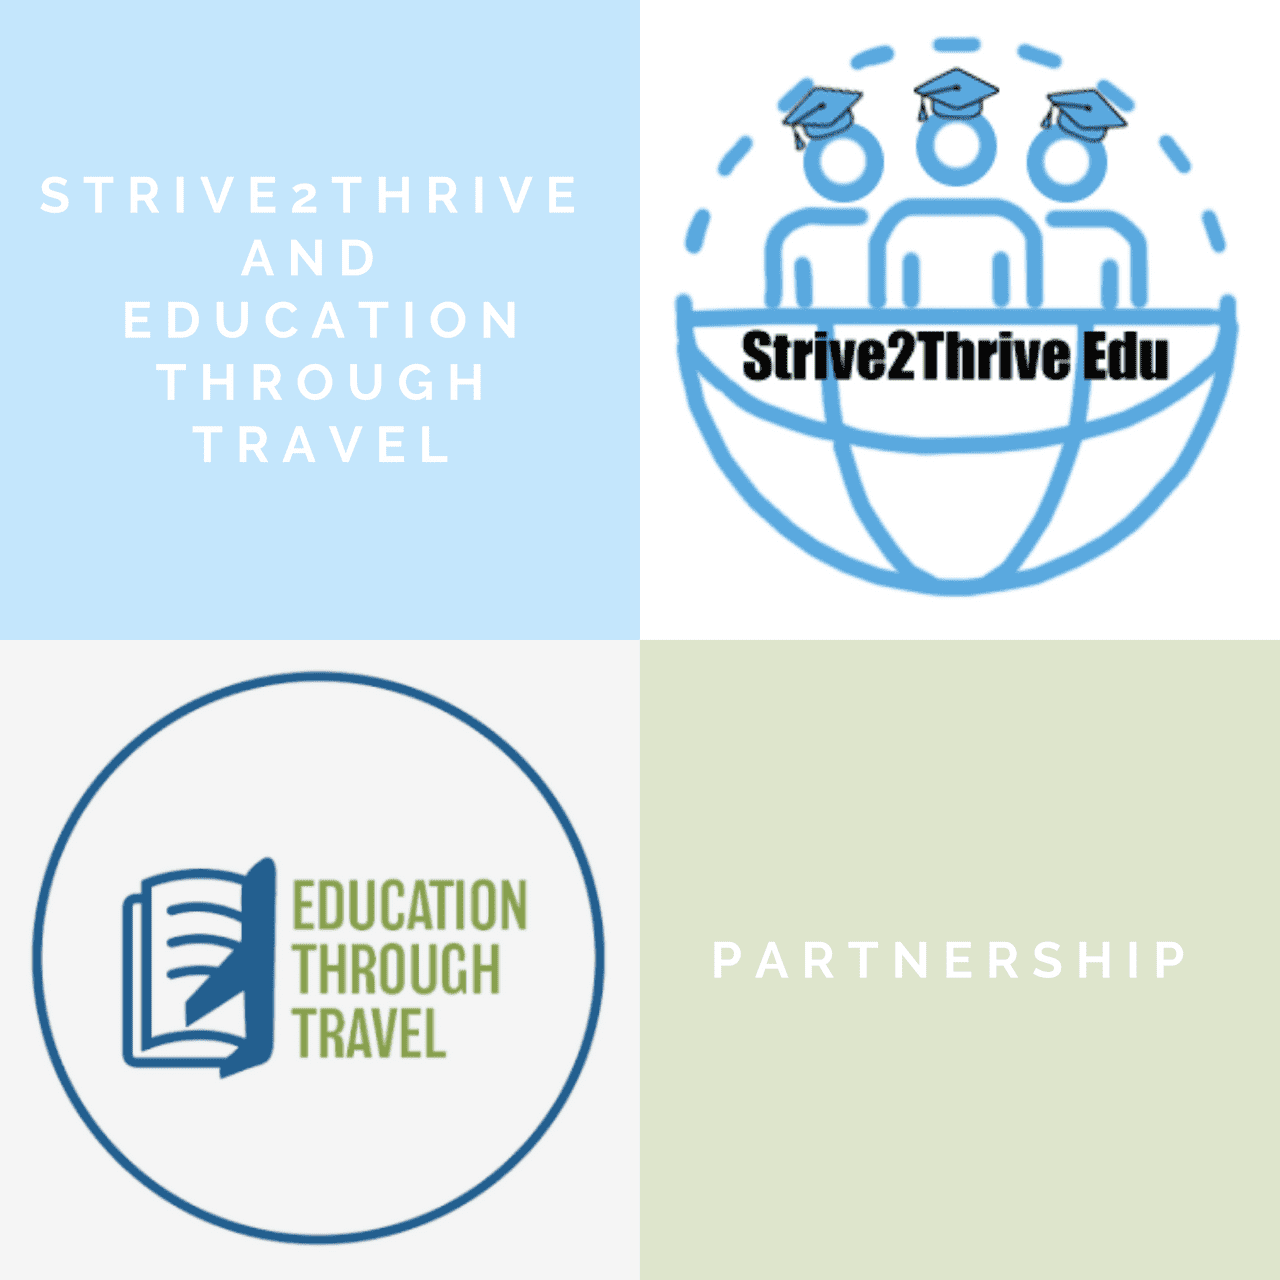 Education Through Travel and Strive2Thrive logo